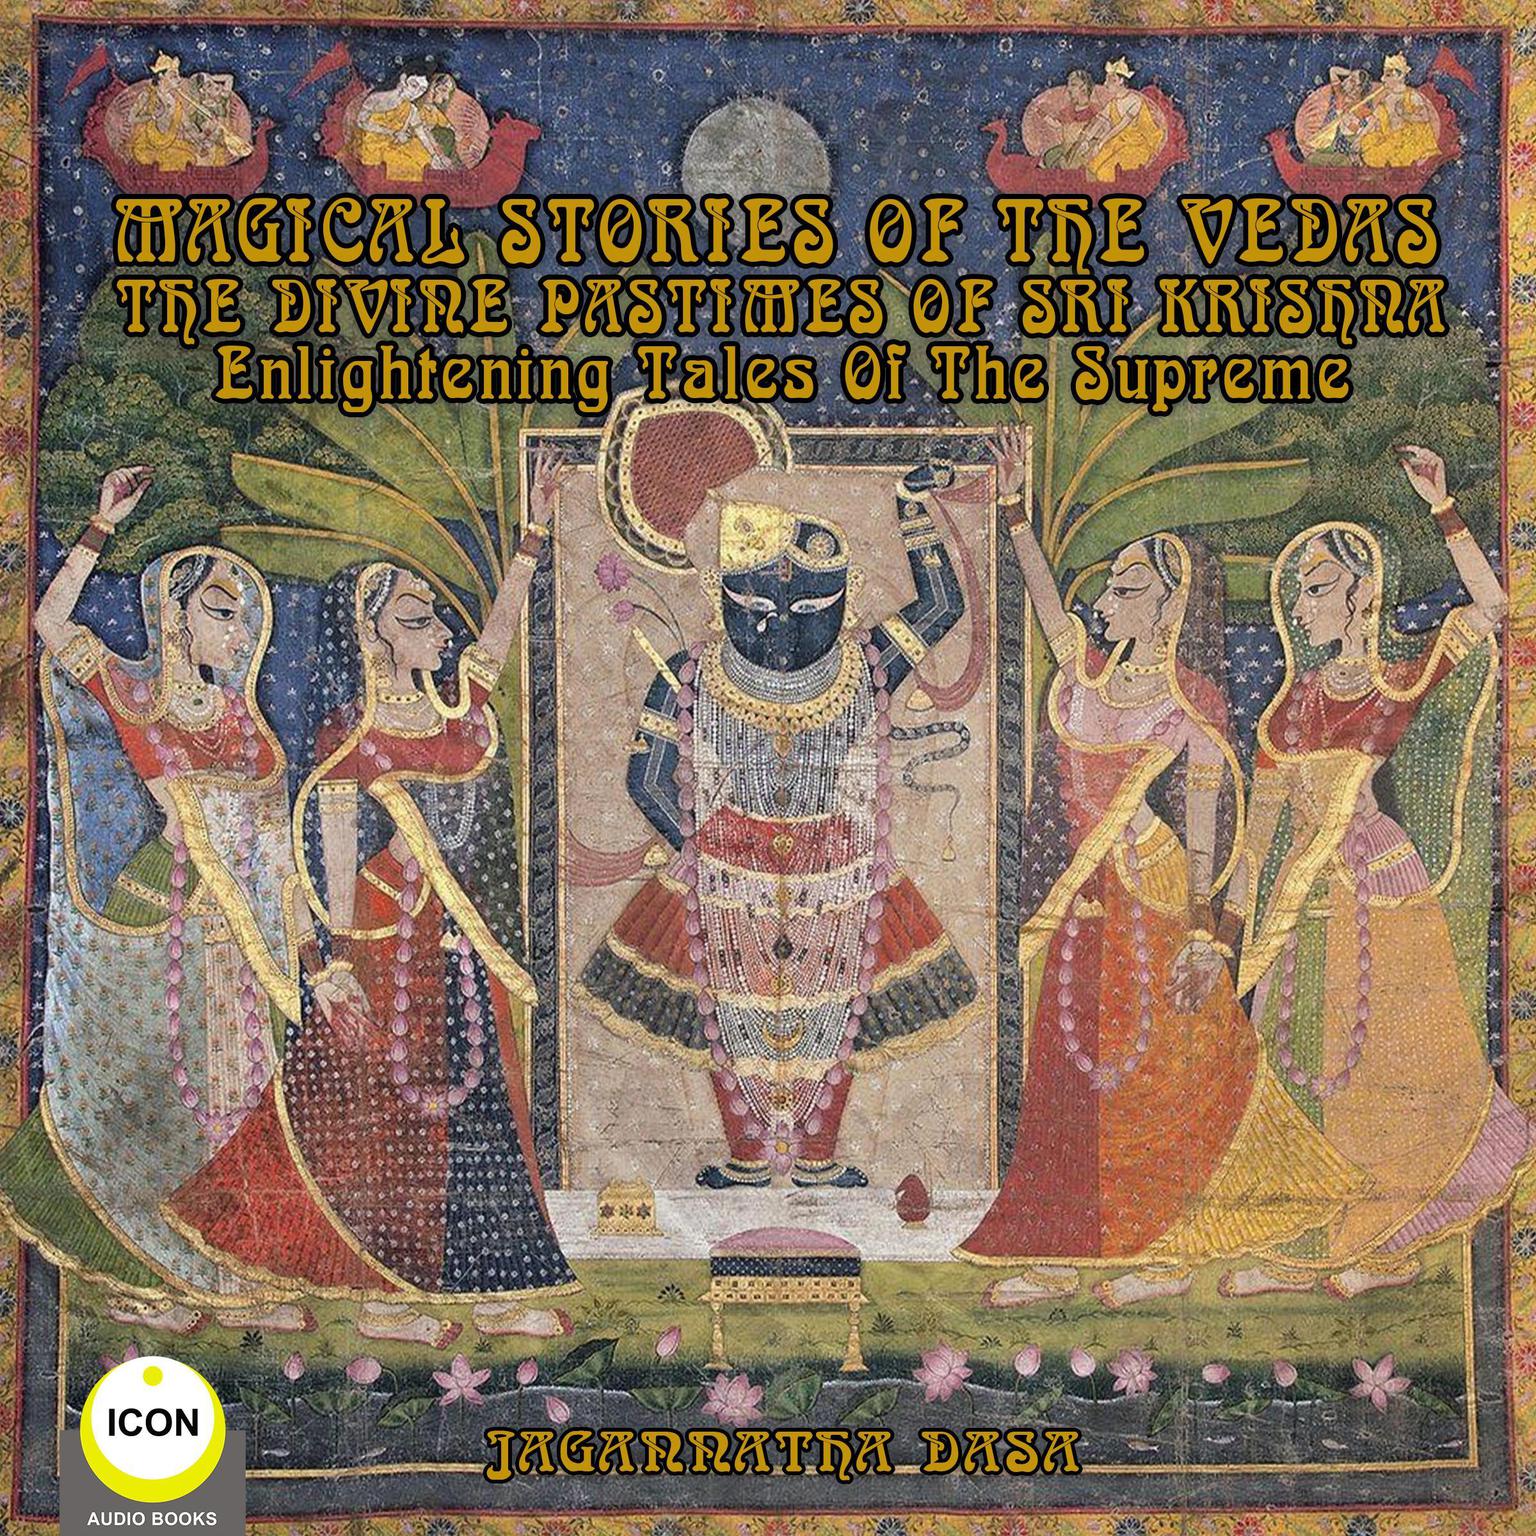 Magical Stories of The Vedas The Divine Pastimes of Sri Krishna - Enlightening Tales of the Supreme Audiobook, by Via excerpt from ancient Vedic scripture